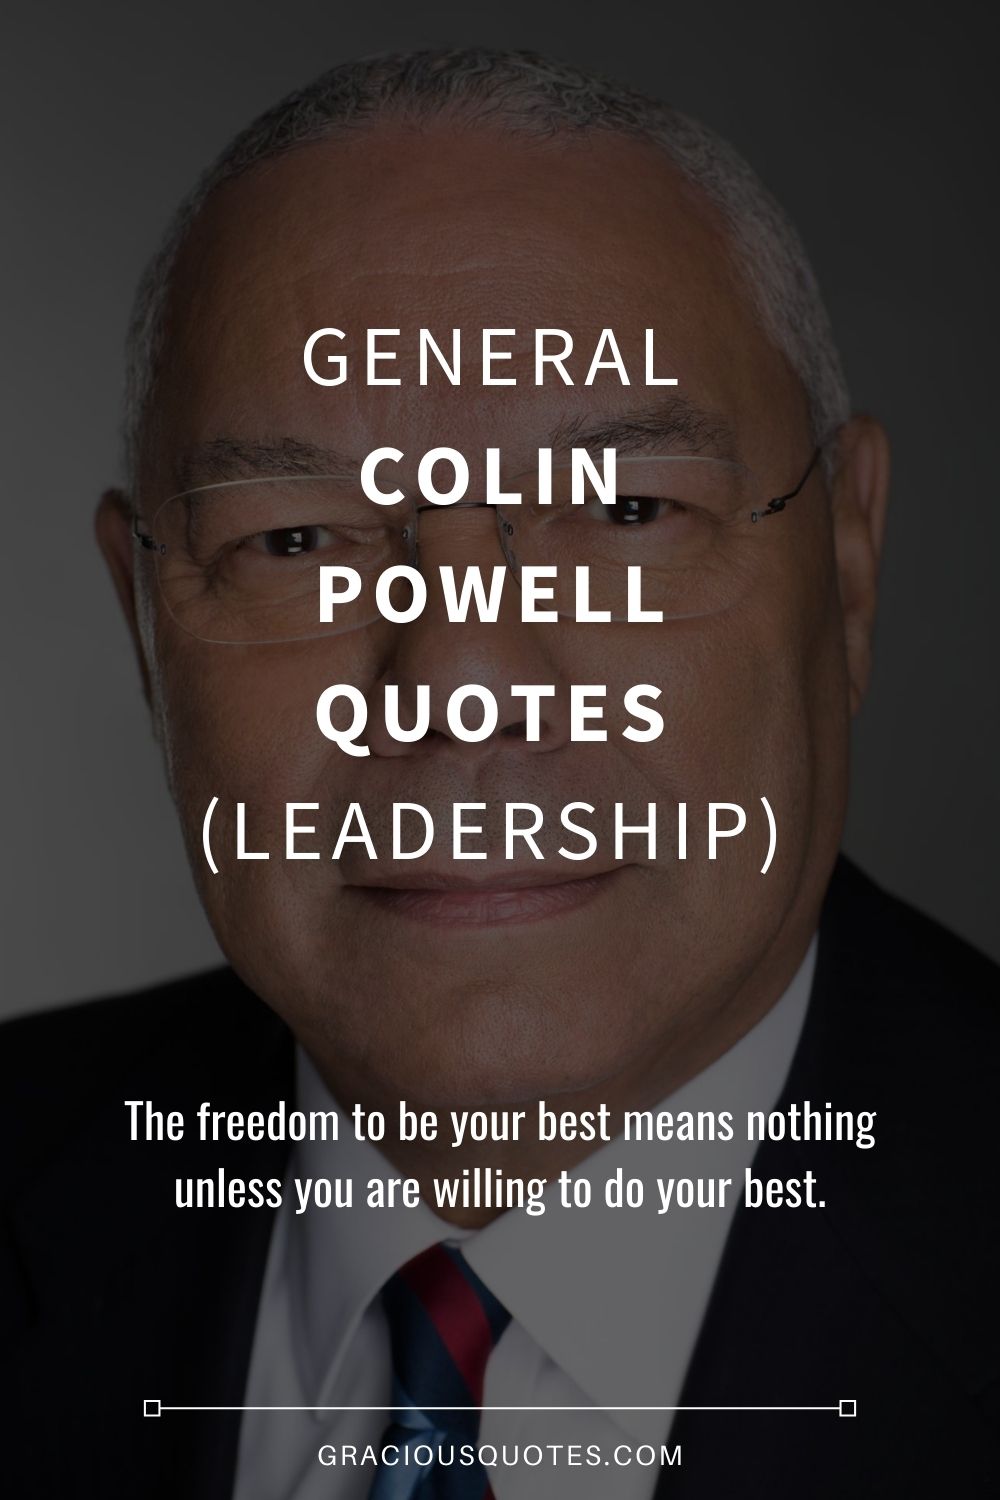 43 General Colin Powell Quotes (LEADERSHIP)